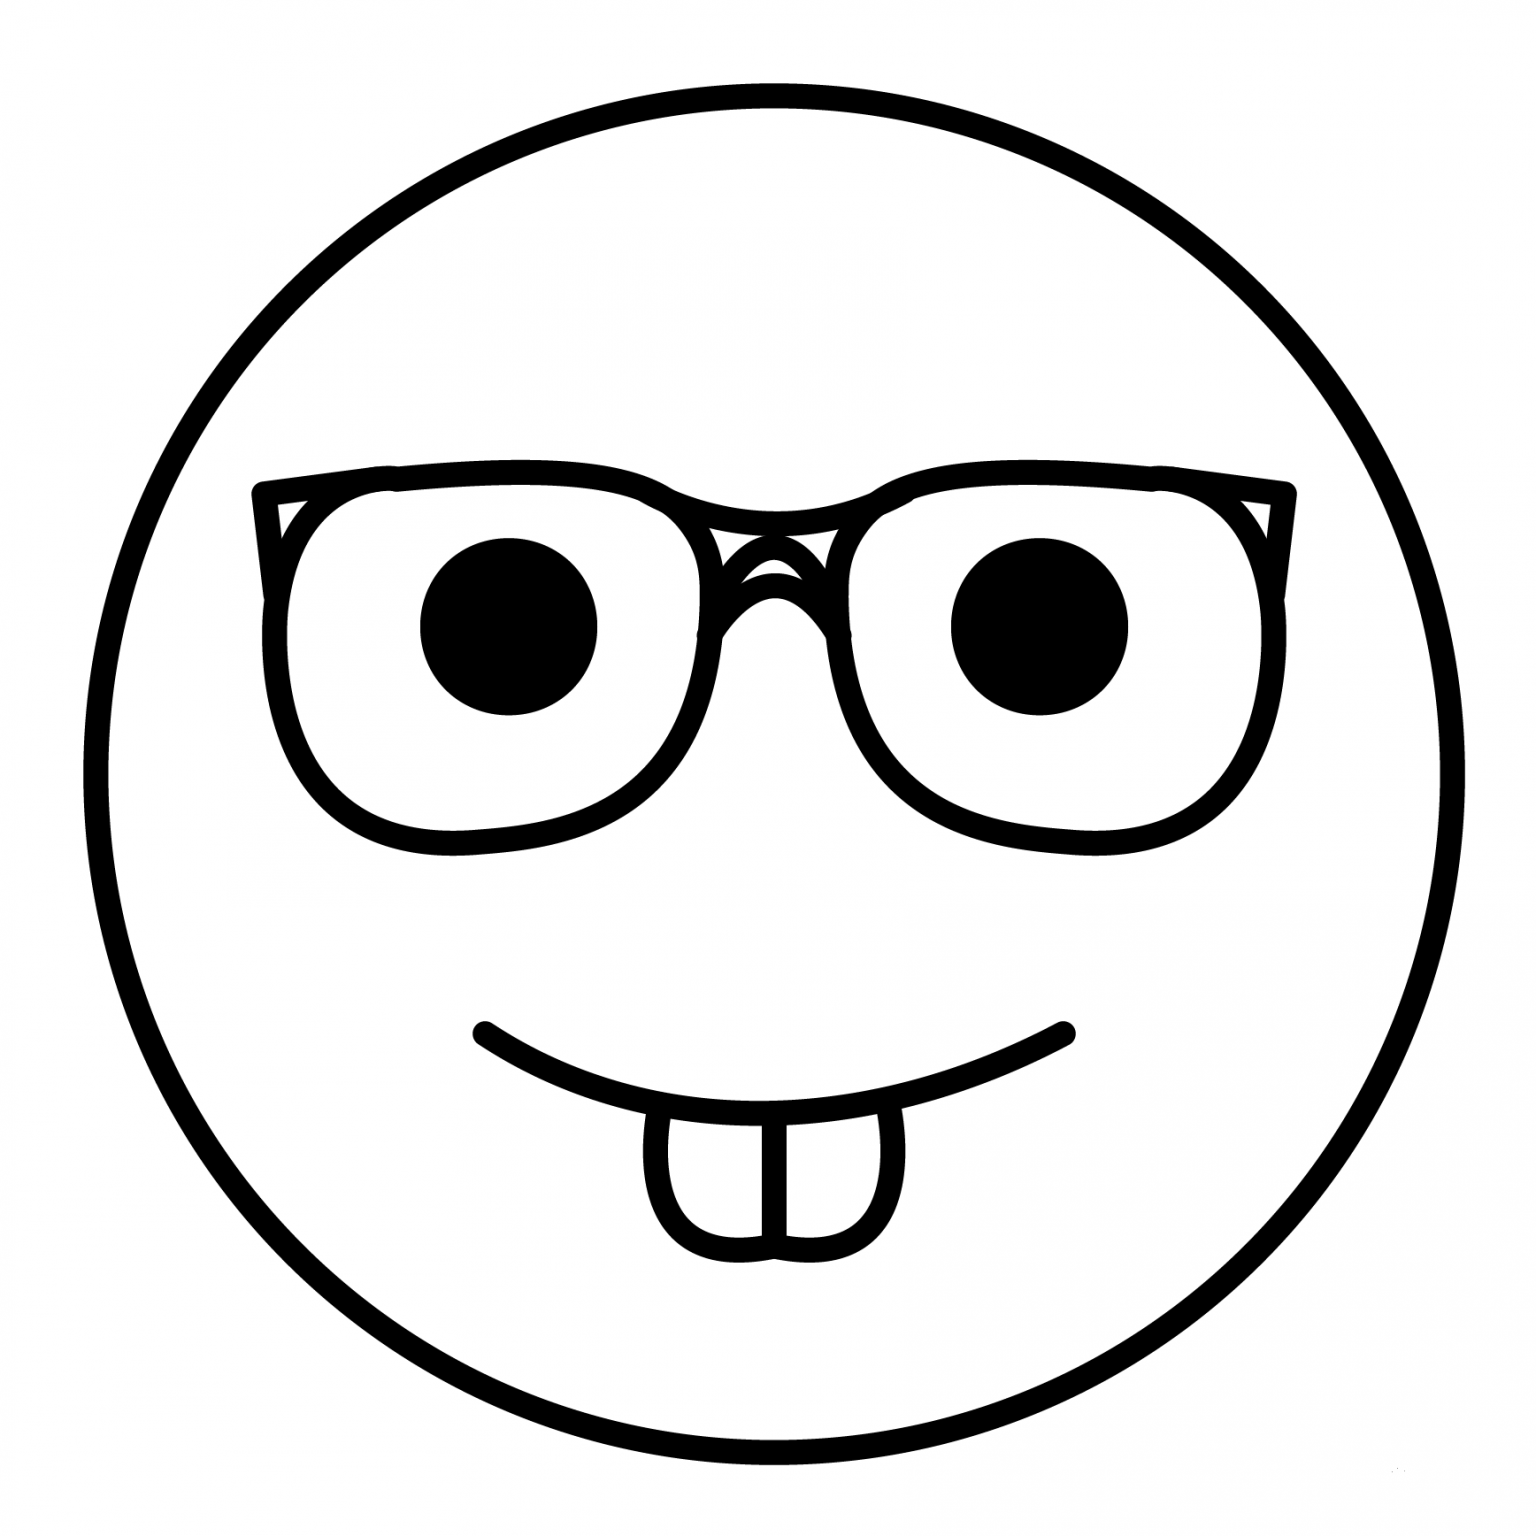 Nerd Face Emoji coloring page - ColouringPages